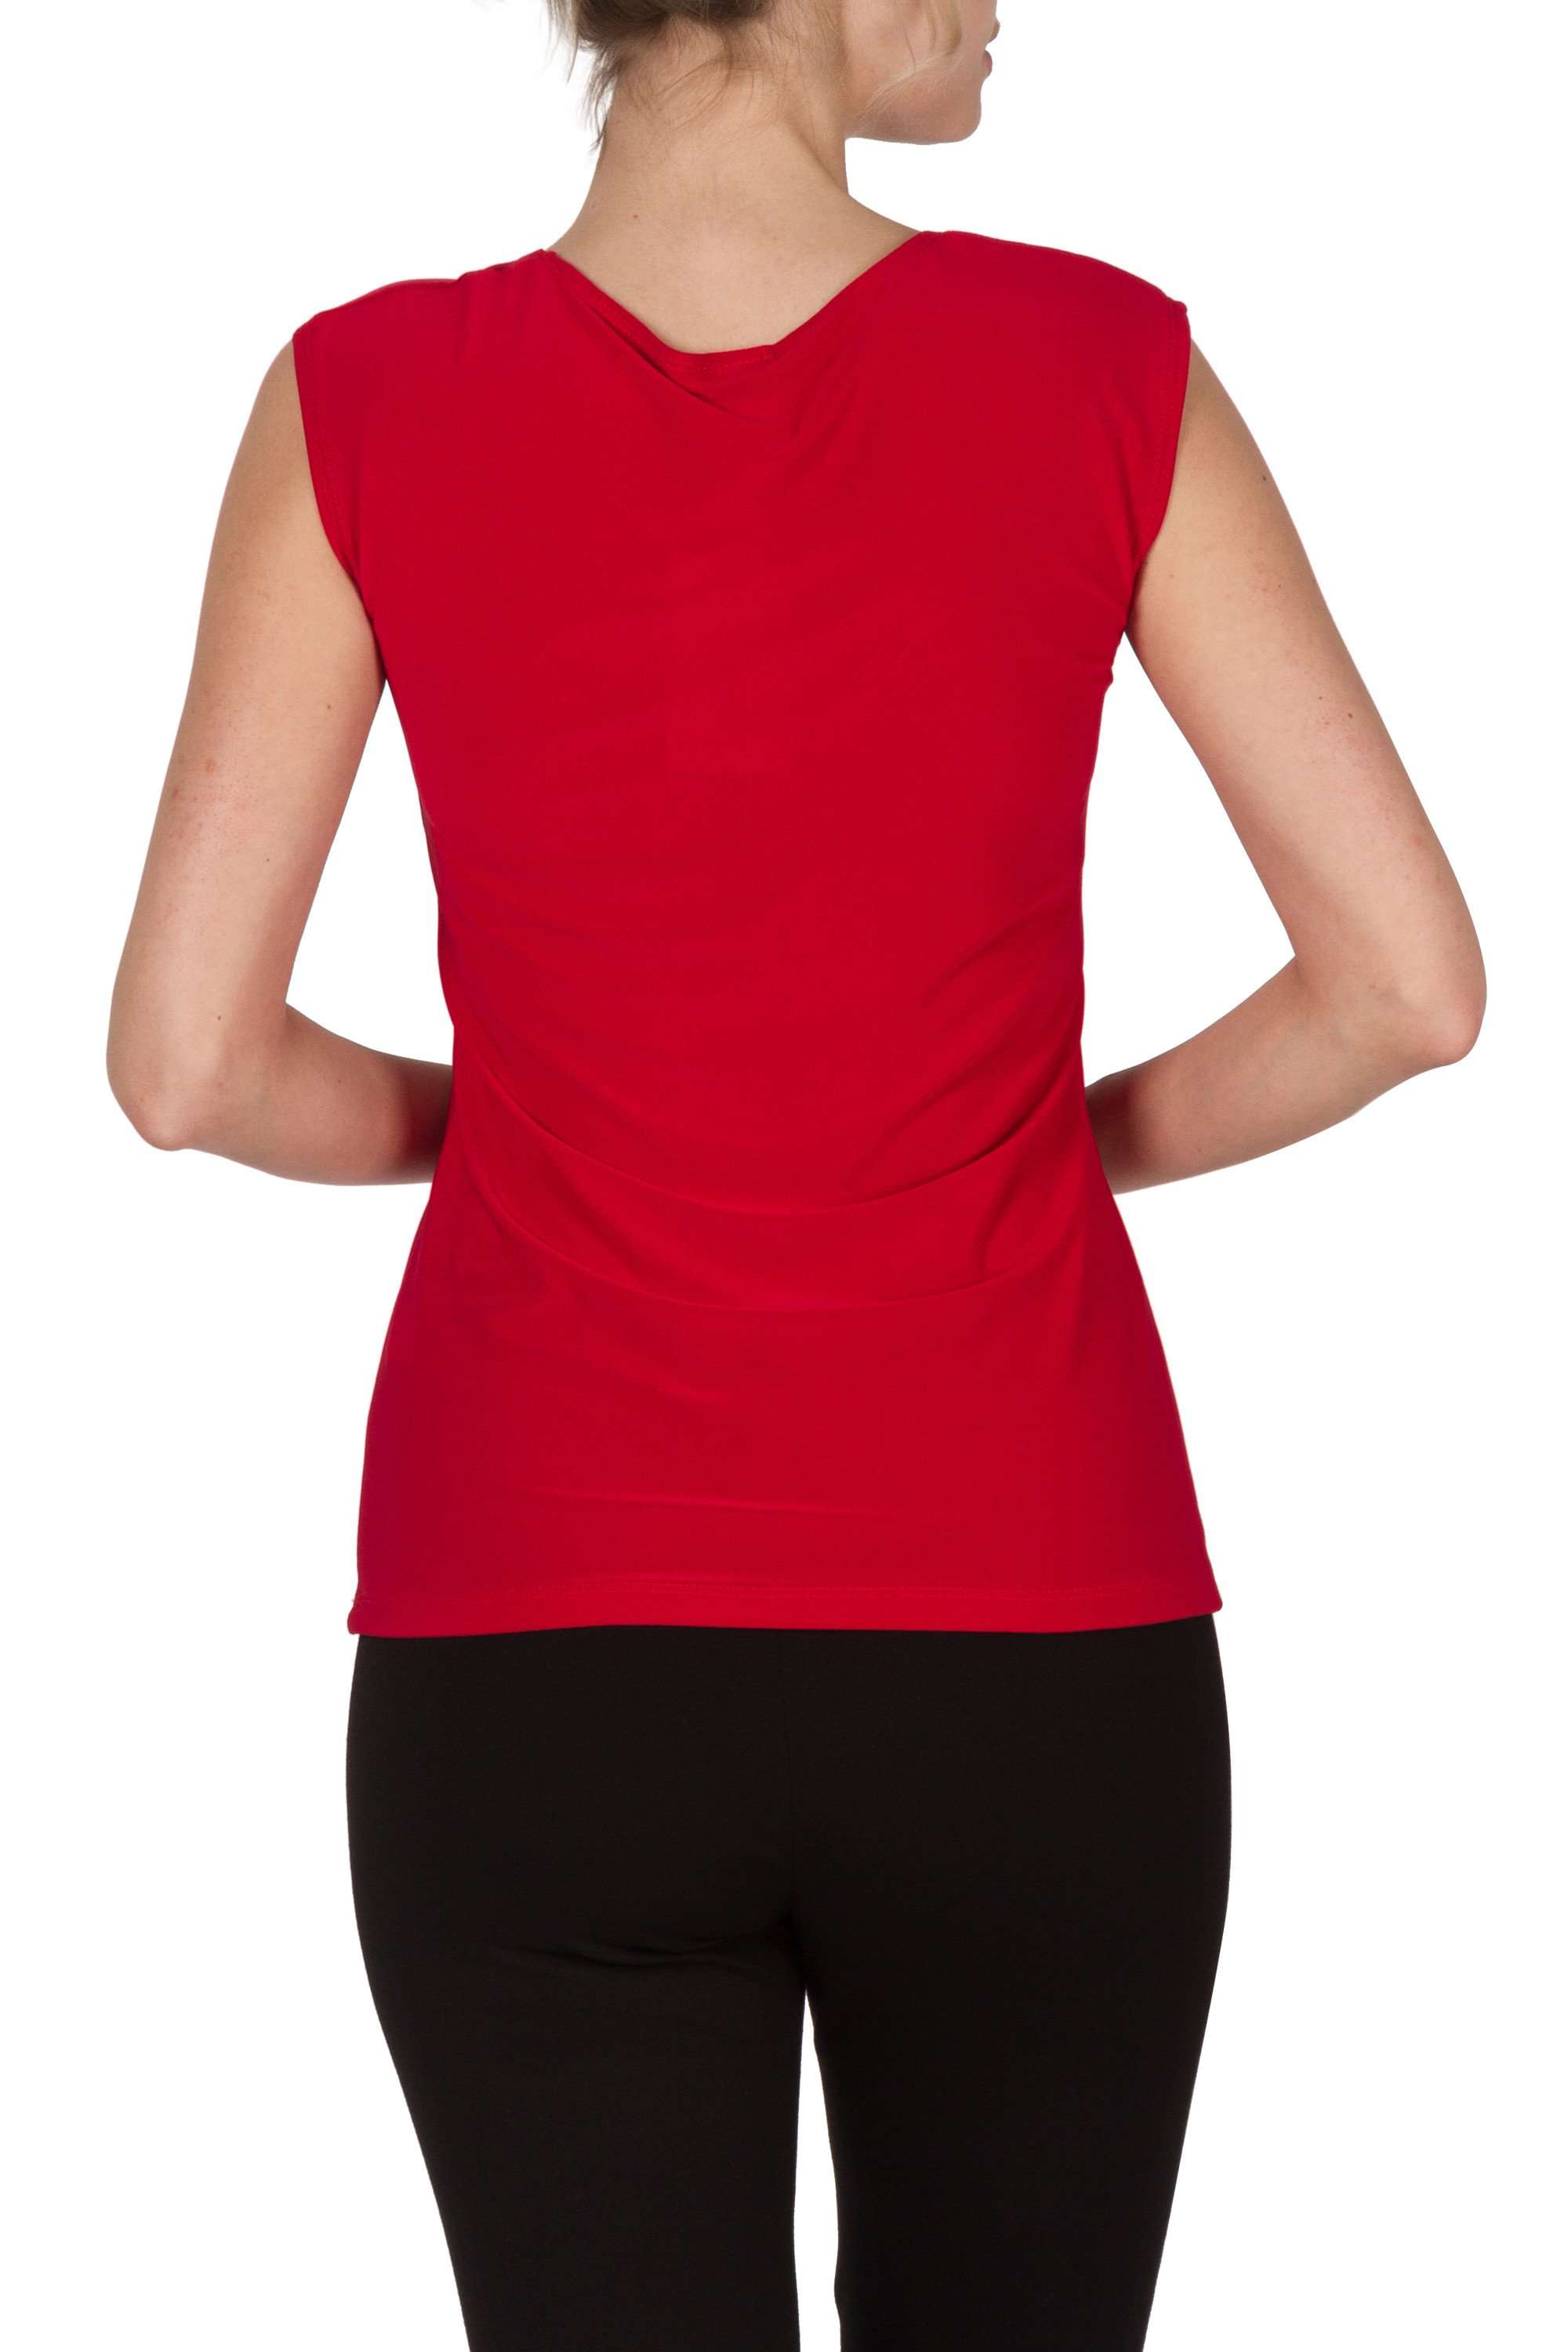 Women's Camisole Canada | Red Camisole Square Neck | YM Style